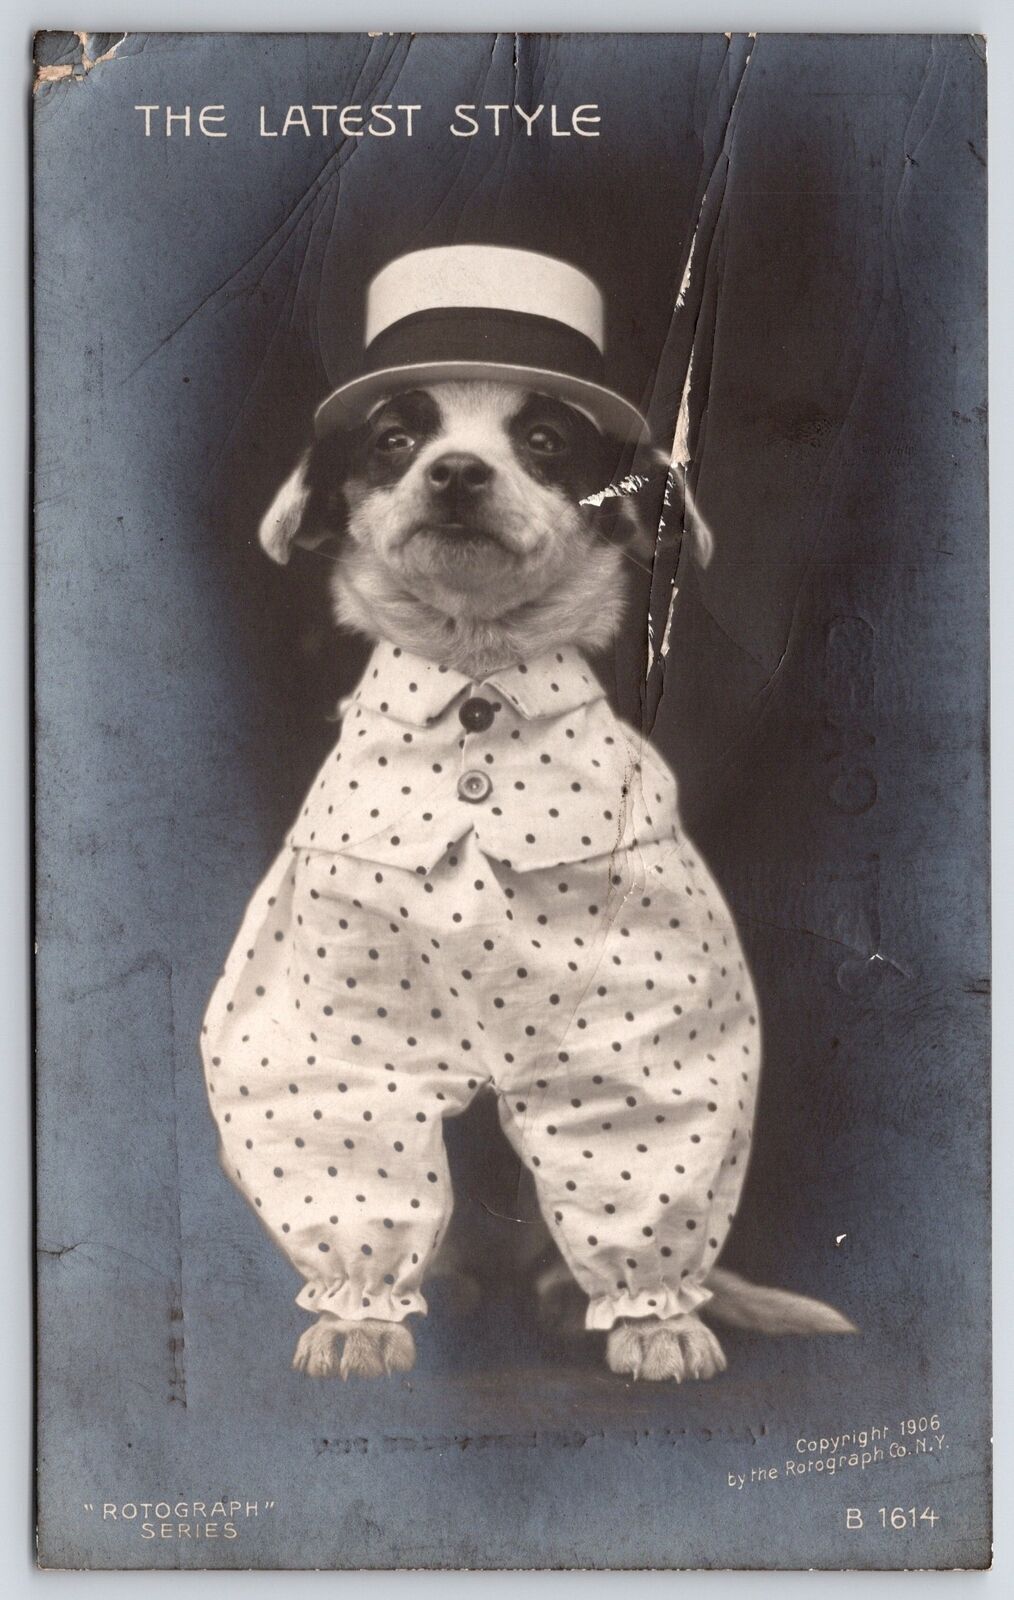 The Latest Style Cute Little Dog In Polka Dots White Shirt Attire Postcard